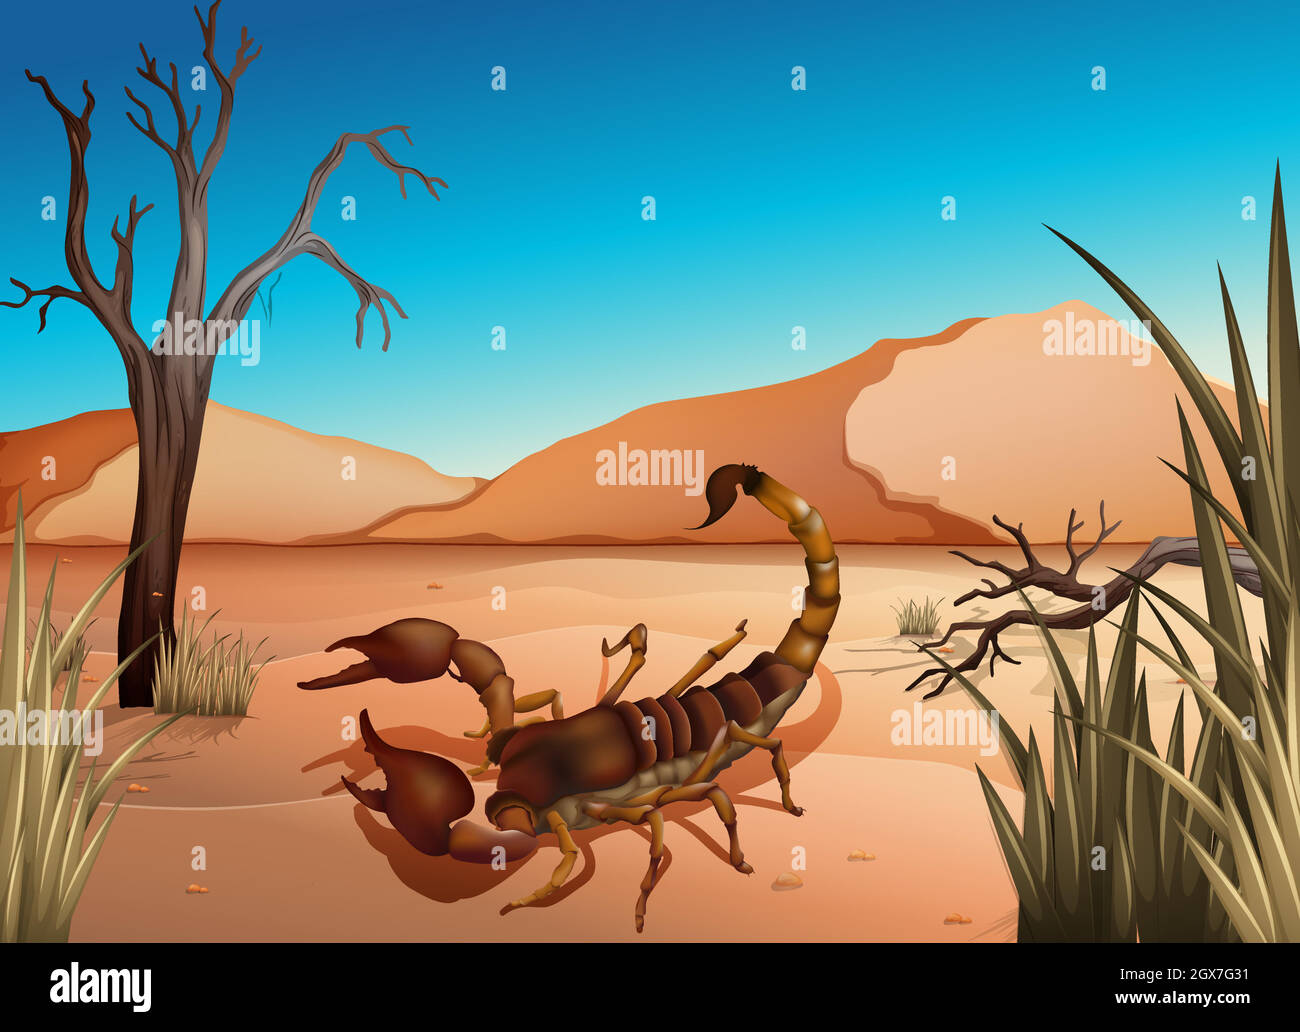 A desert with a scorpion Stock Vector